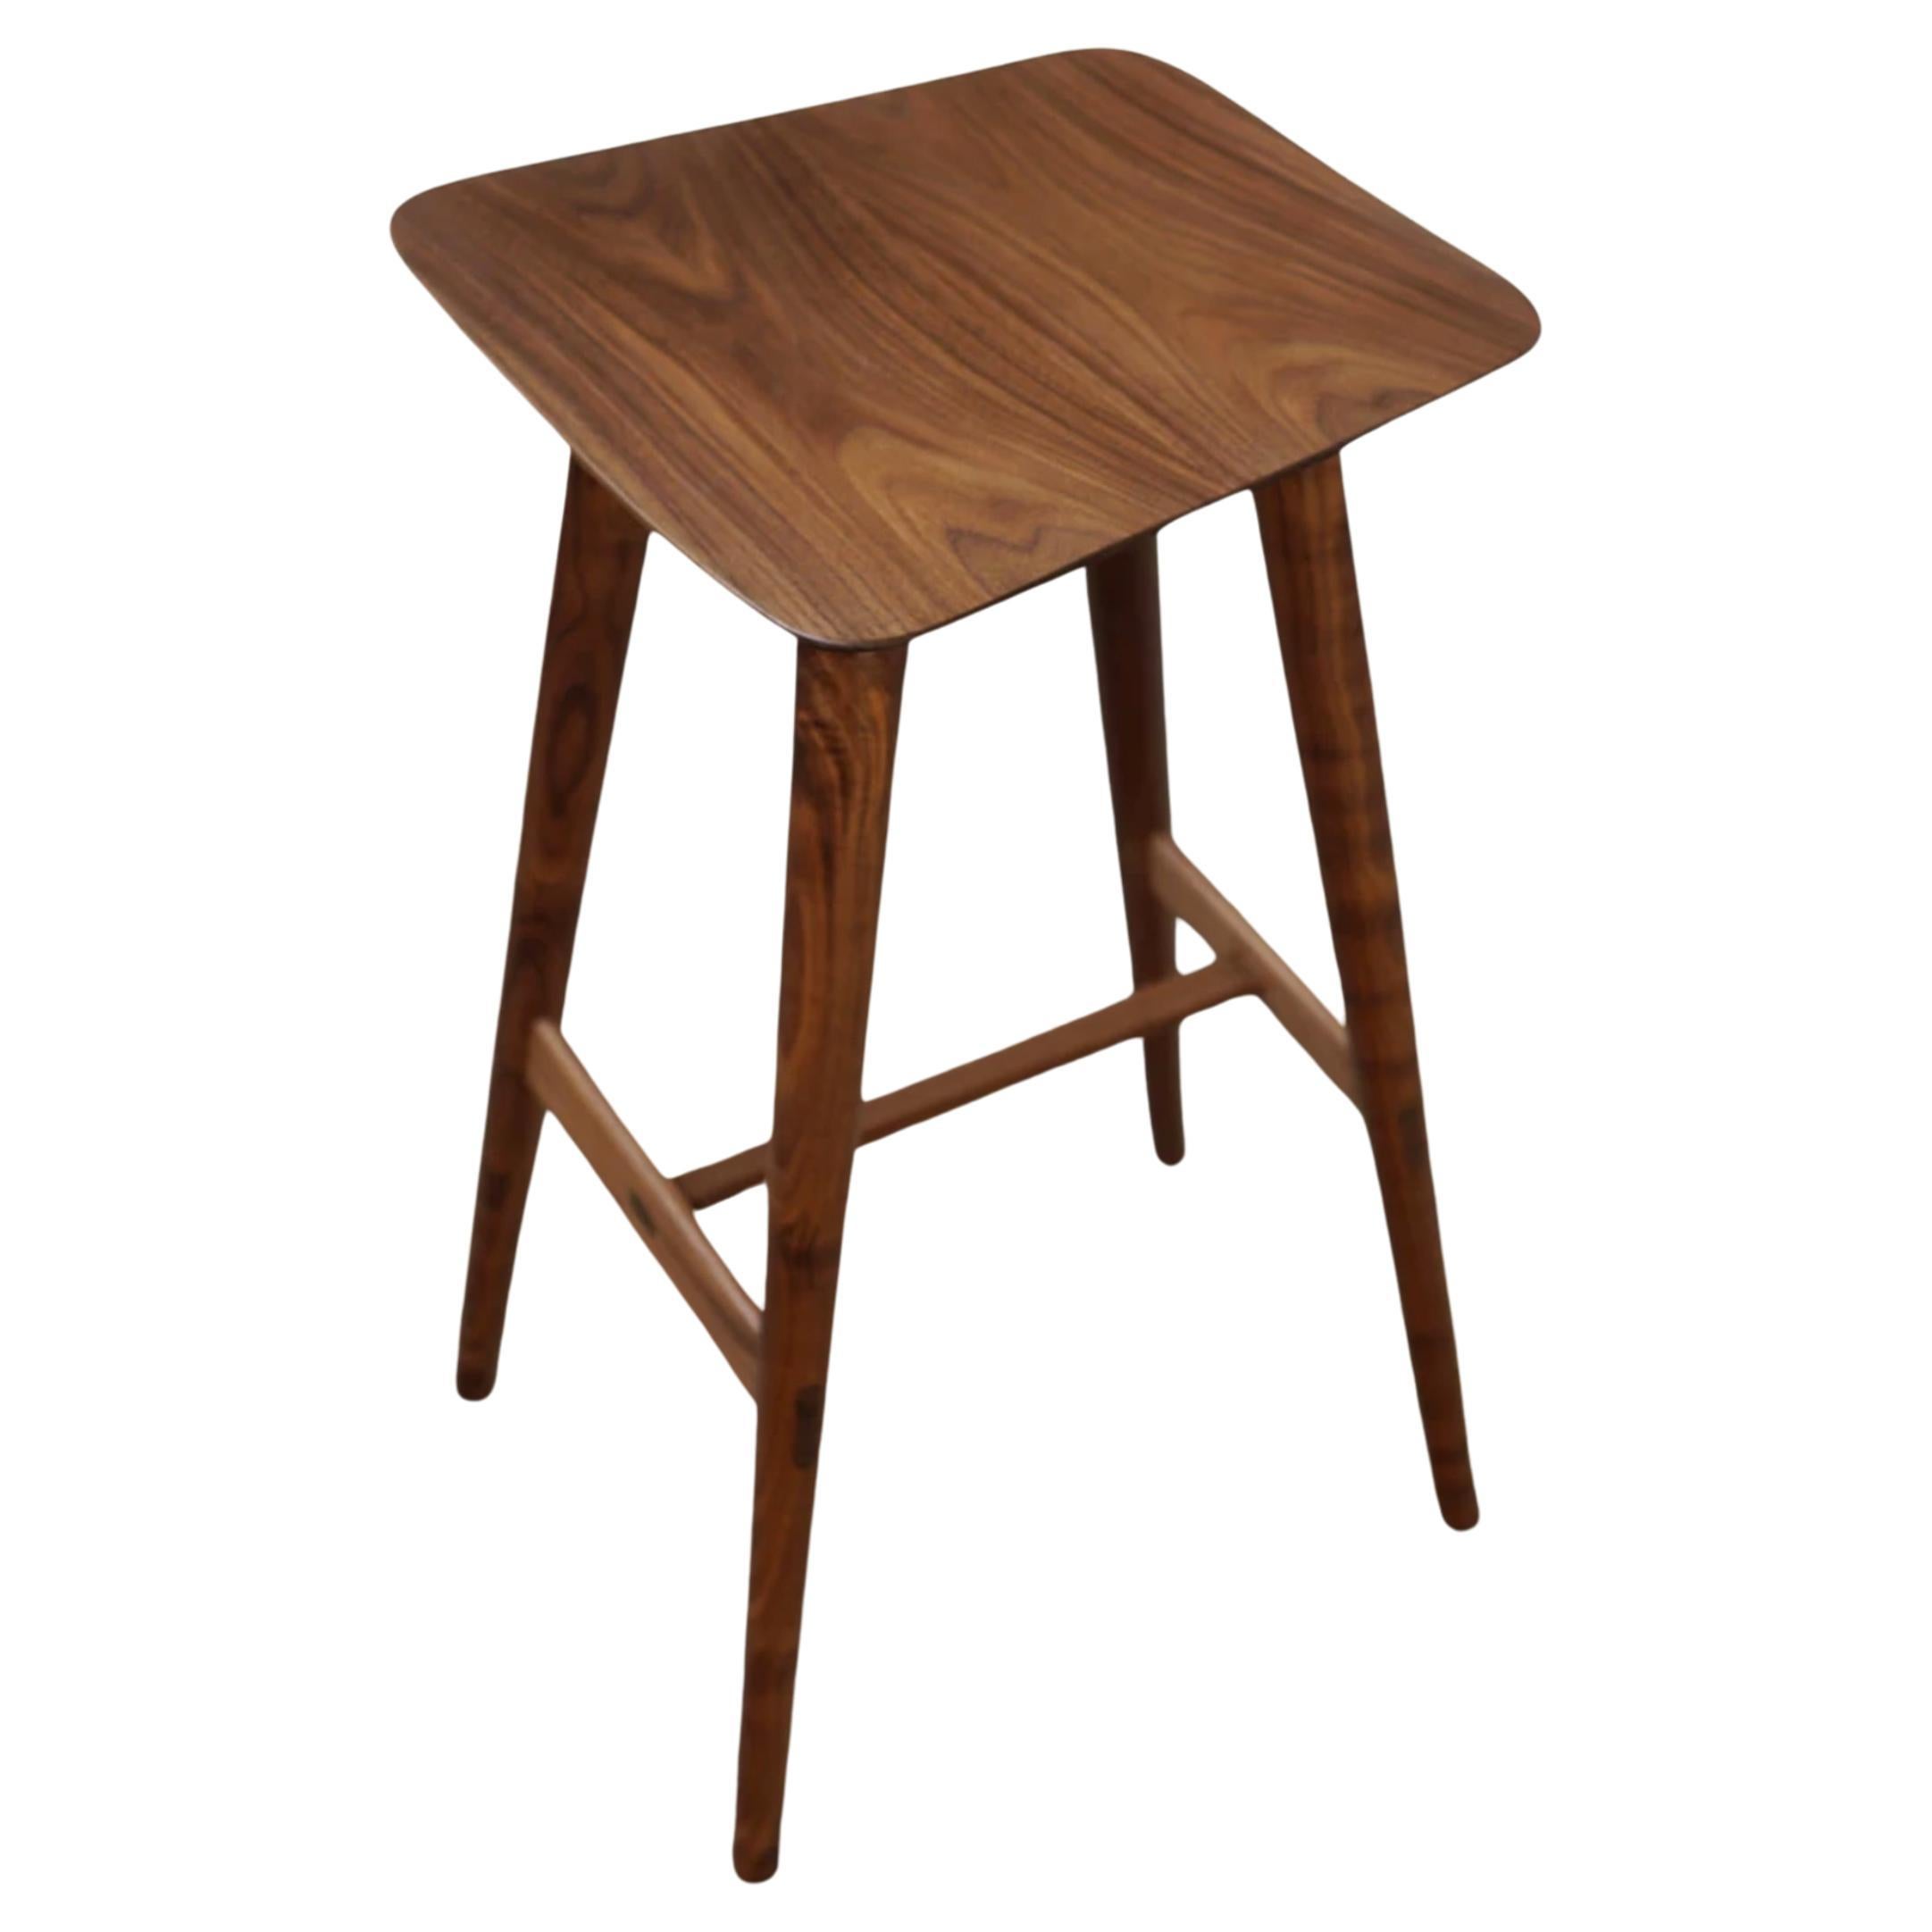 Mantaray Counter Stool in Walnut Wood, Hand-Sculpted Stool by Kokora For Sale